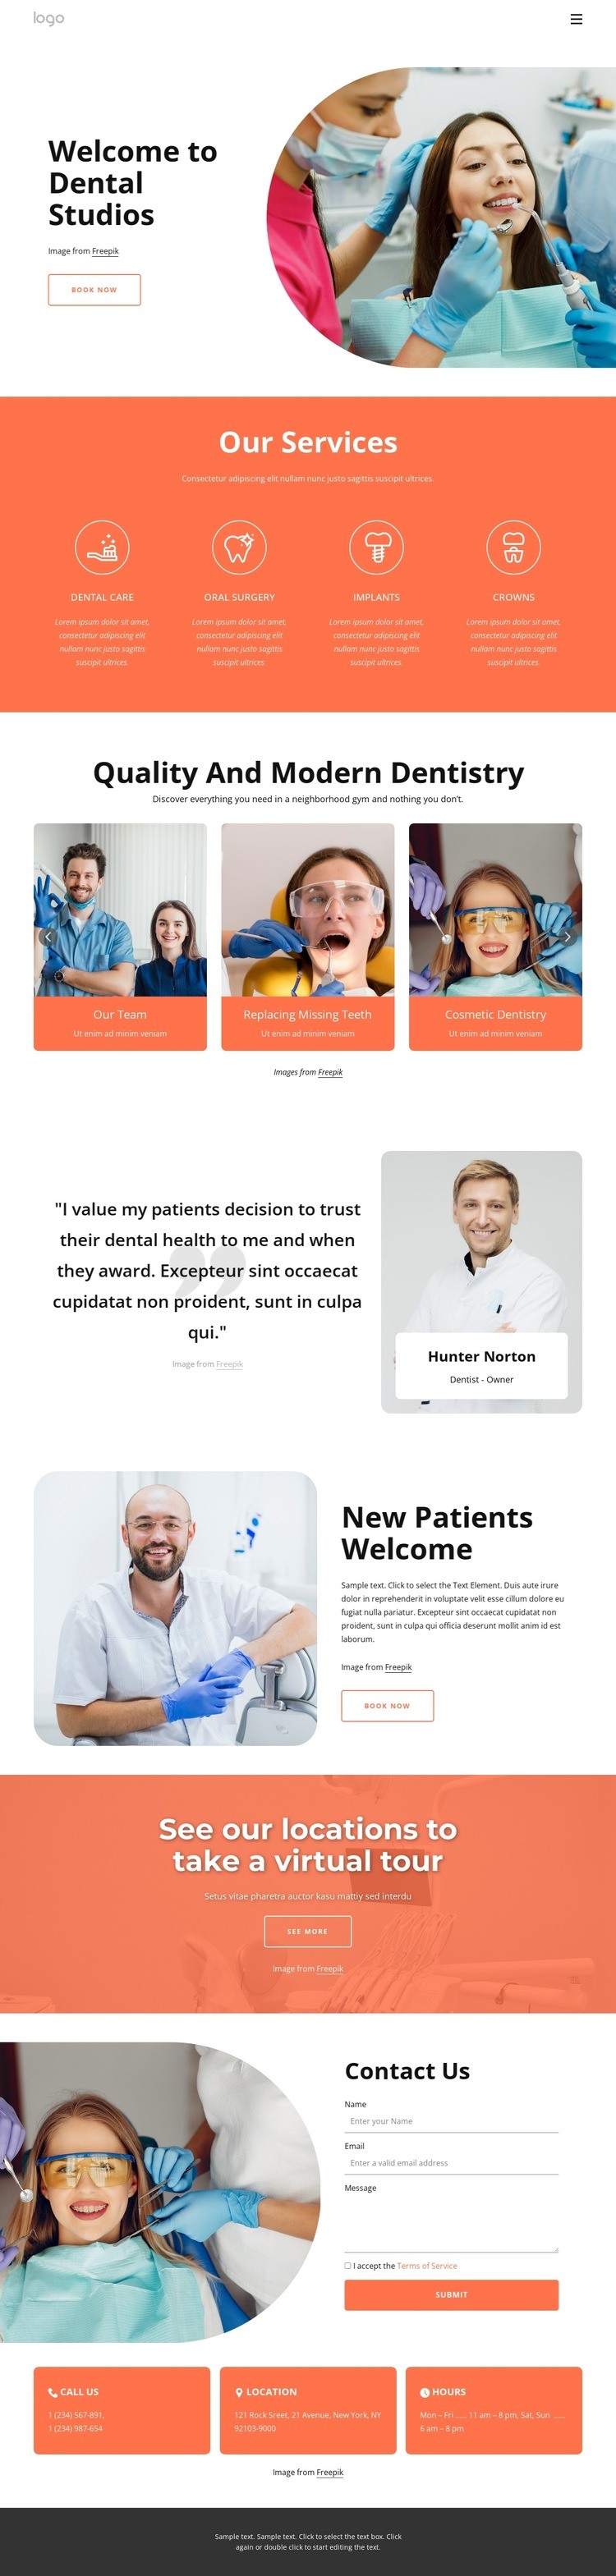 Welcome to dental studios Wix Template Alternative